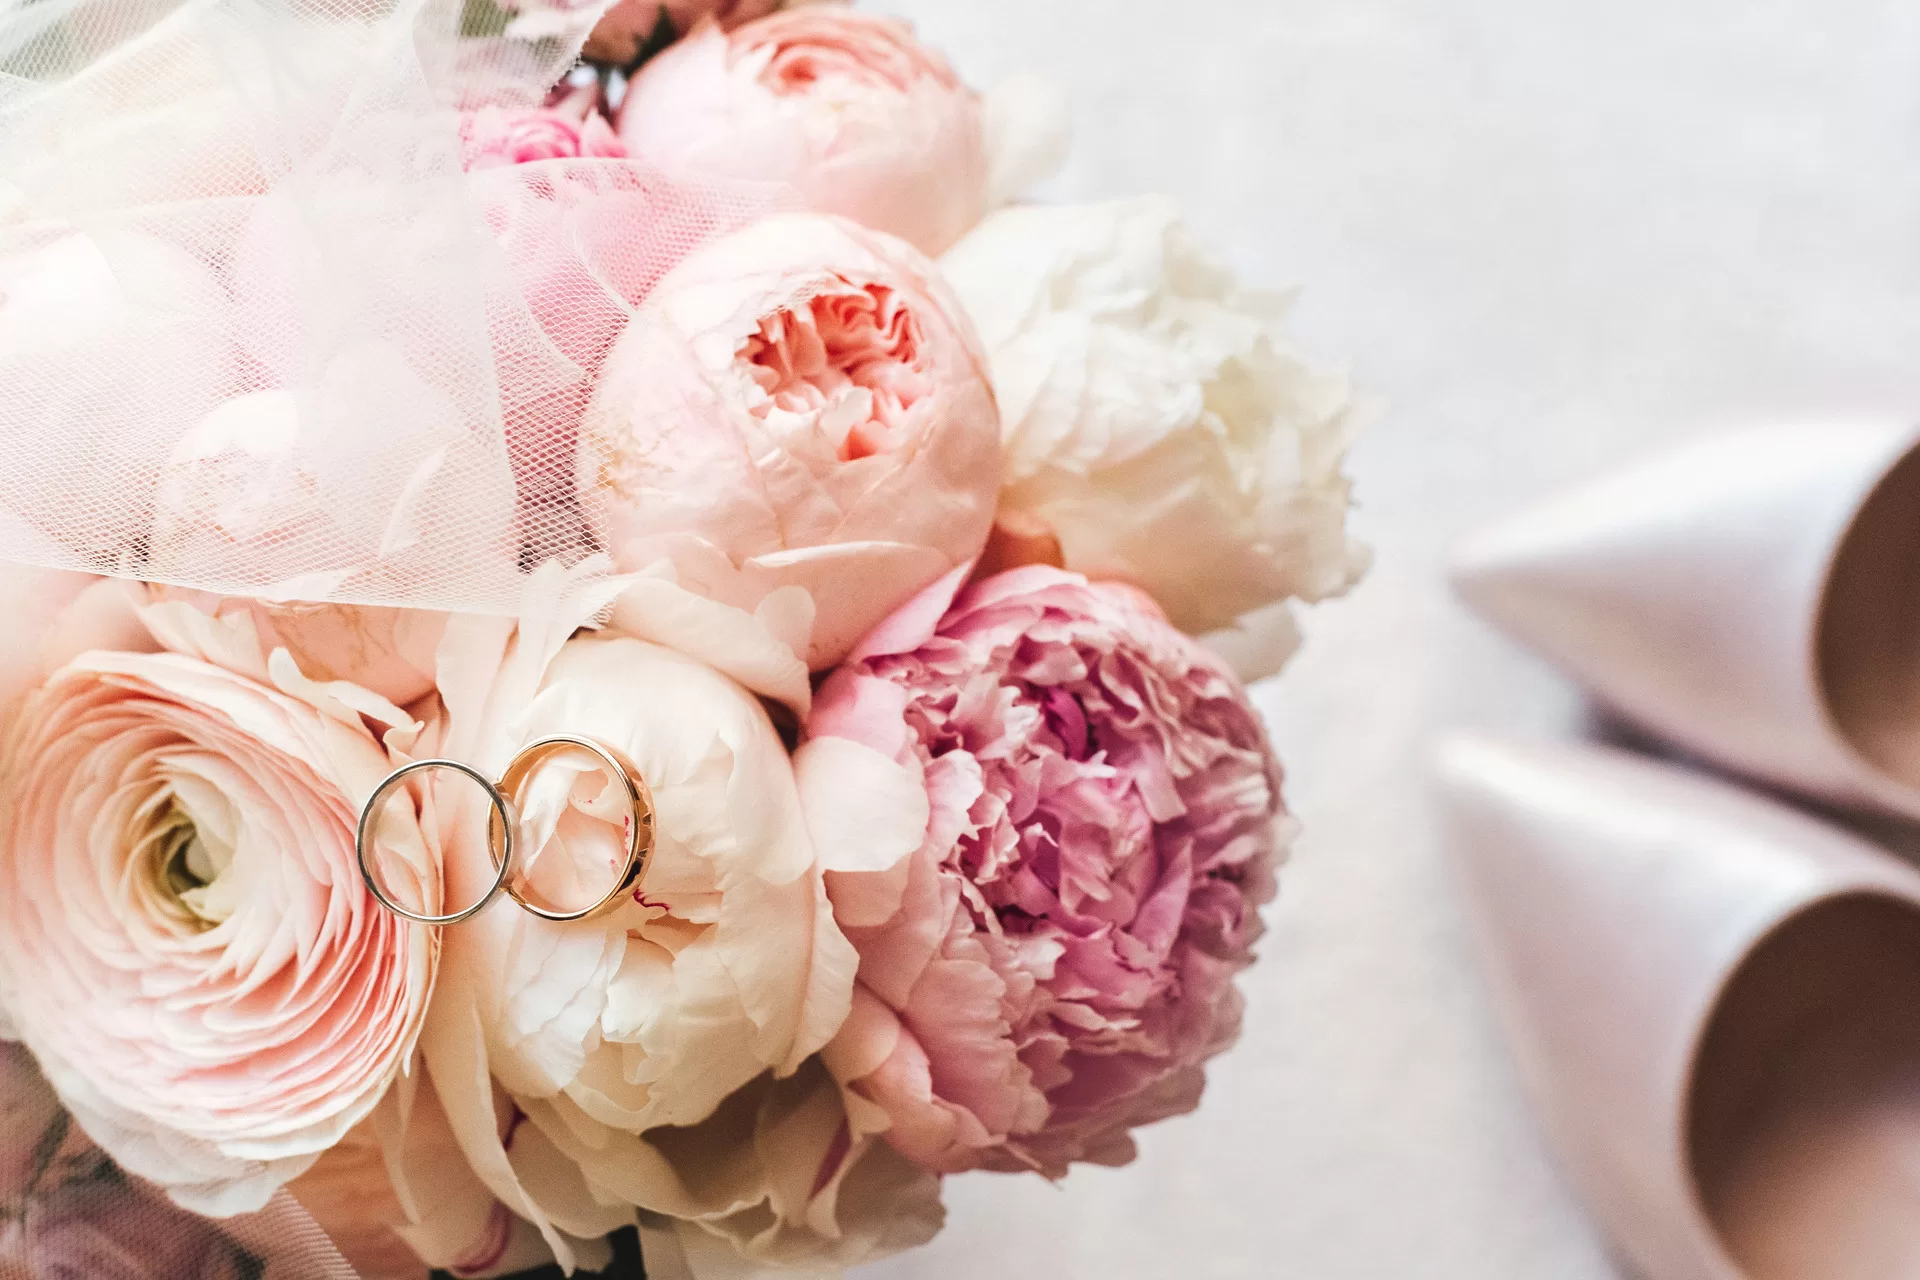 Factors to Take into Account When Selecting Your Wedding Colors